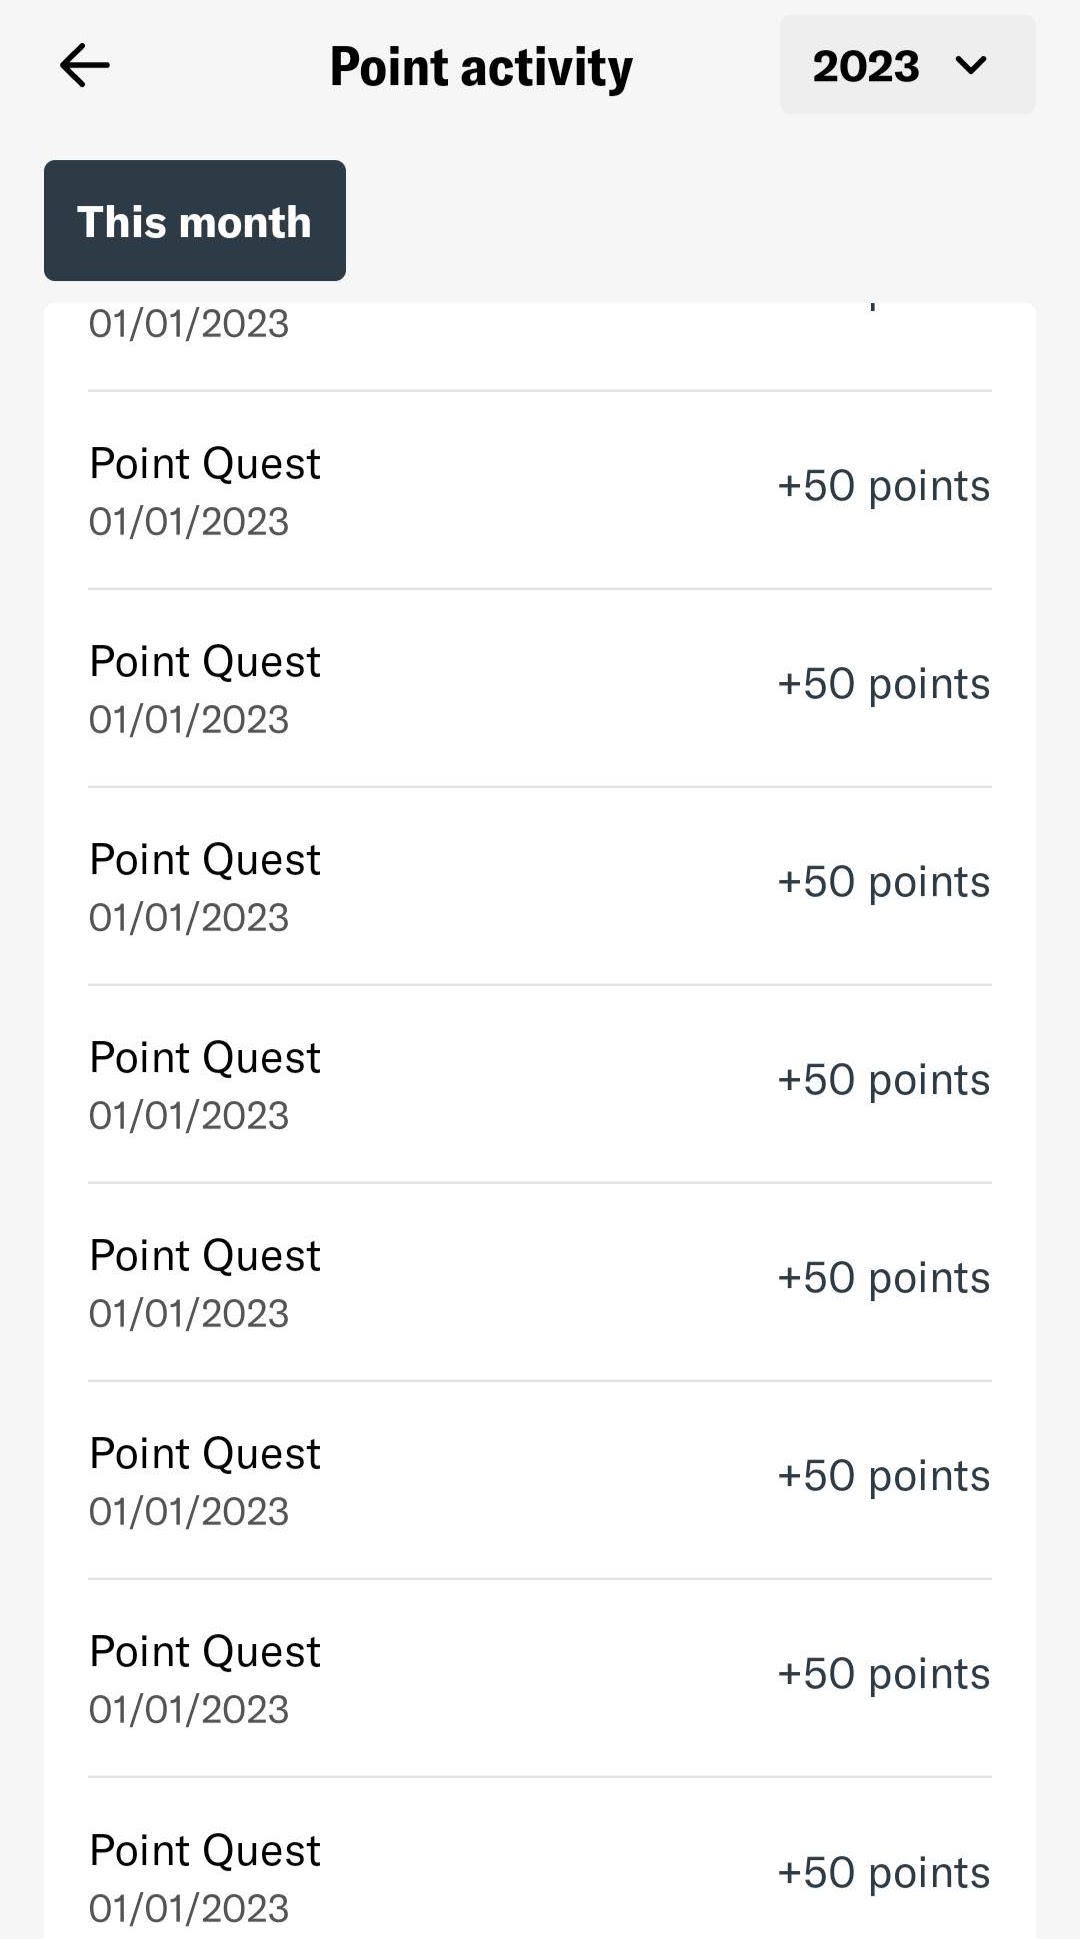 Screenshot from the Bilt app showing points earned from Point Quest